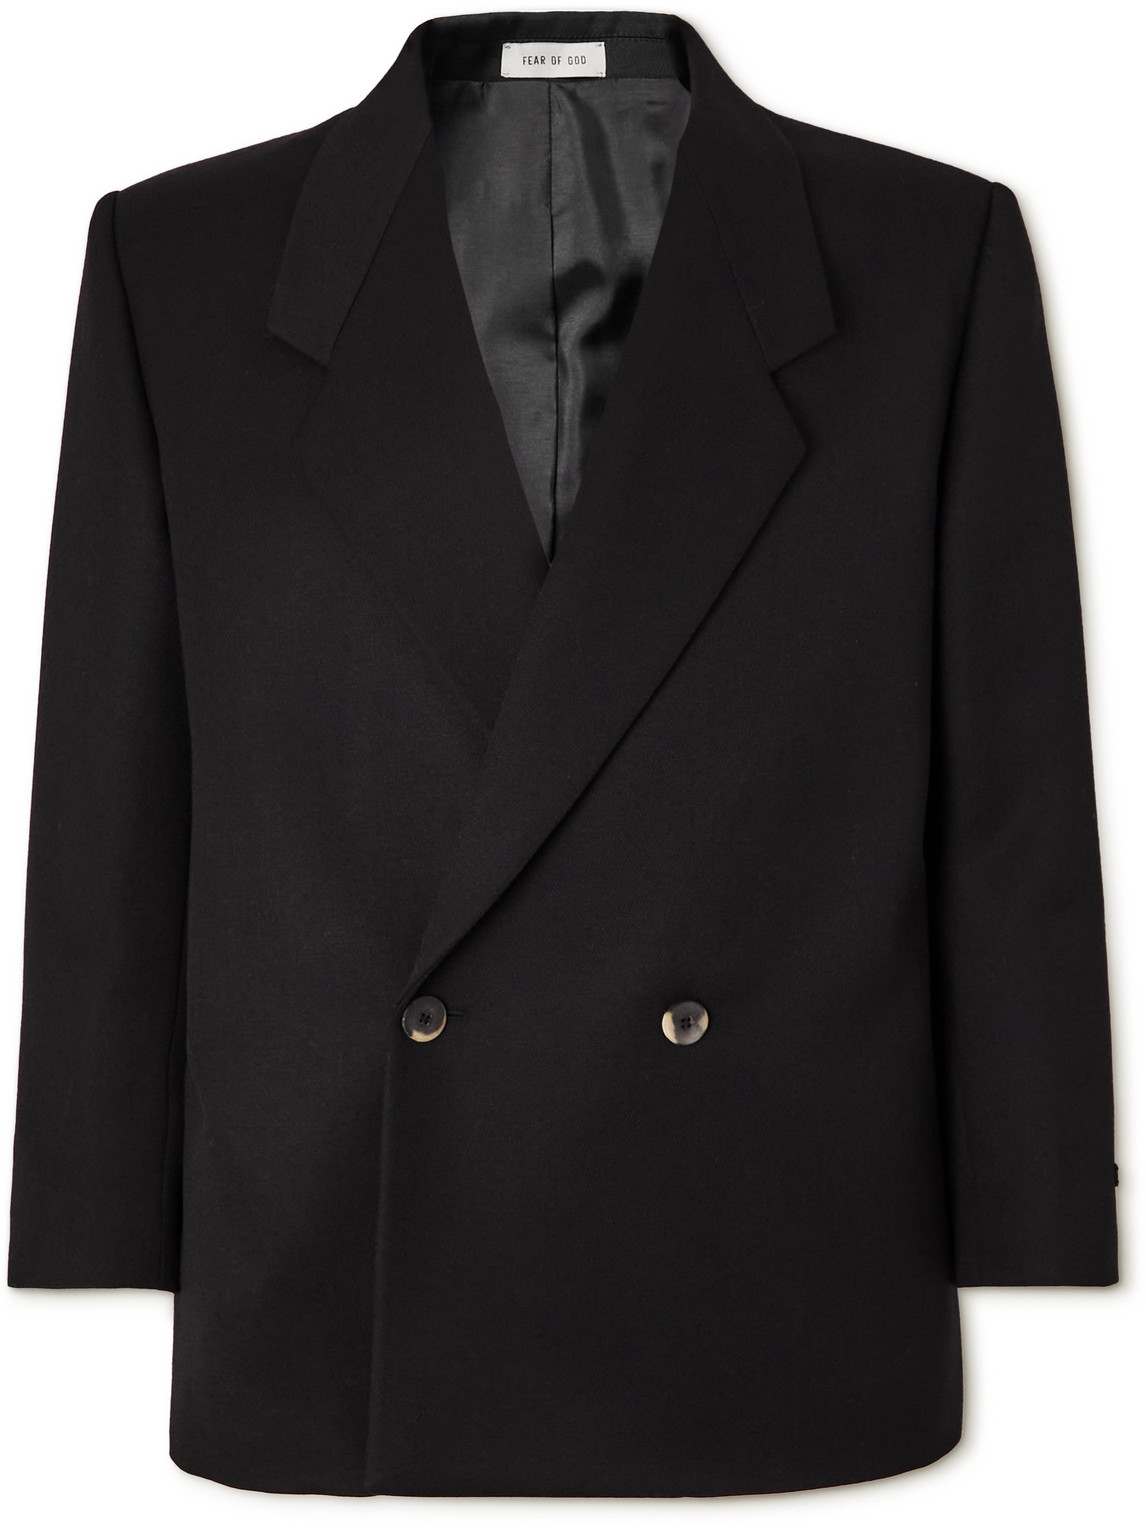 FEAR OF GOD ETERNAL DOUBLE-BREASTED CAVALRY WOOL-TWILL SUIT JACKET